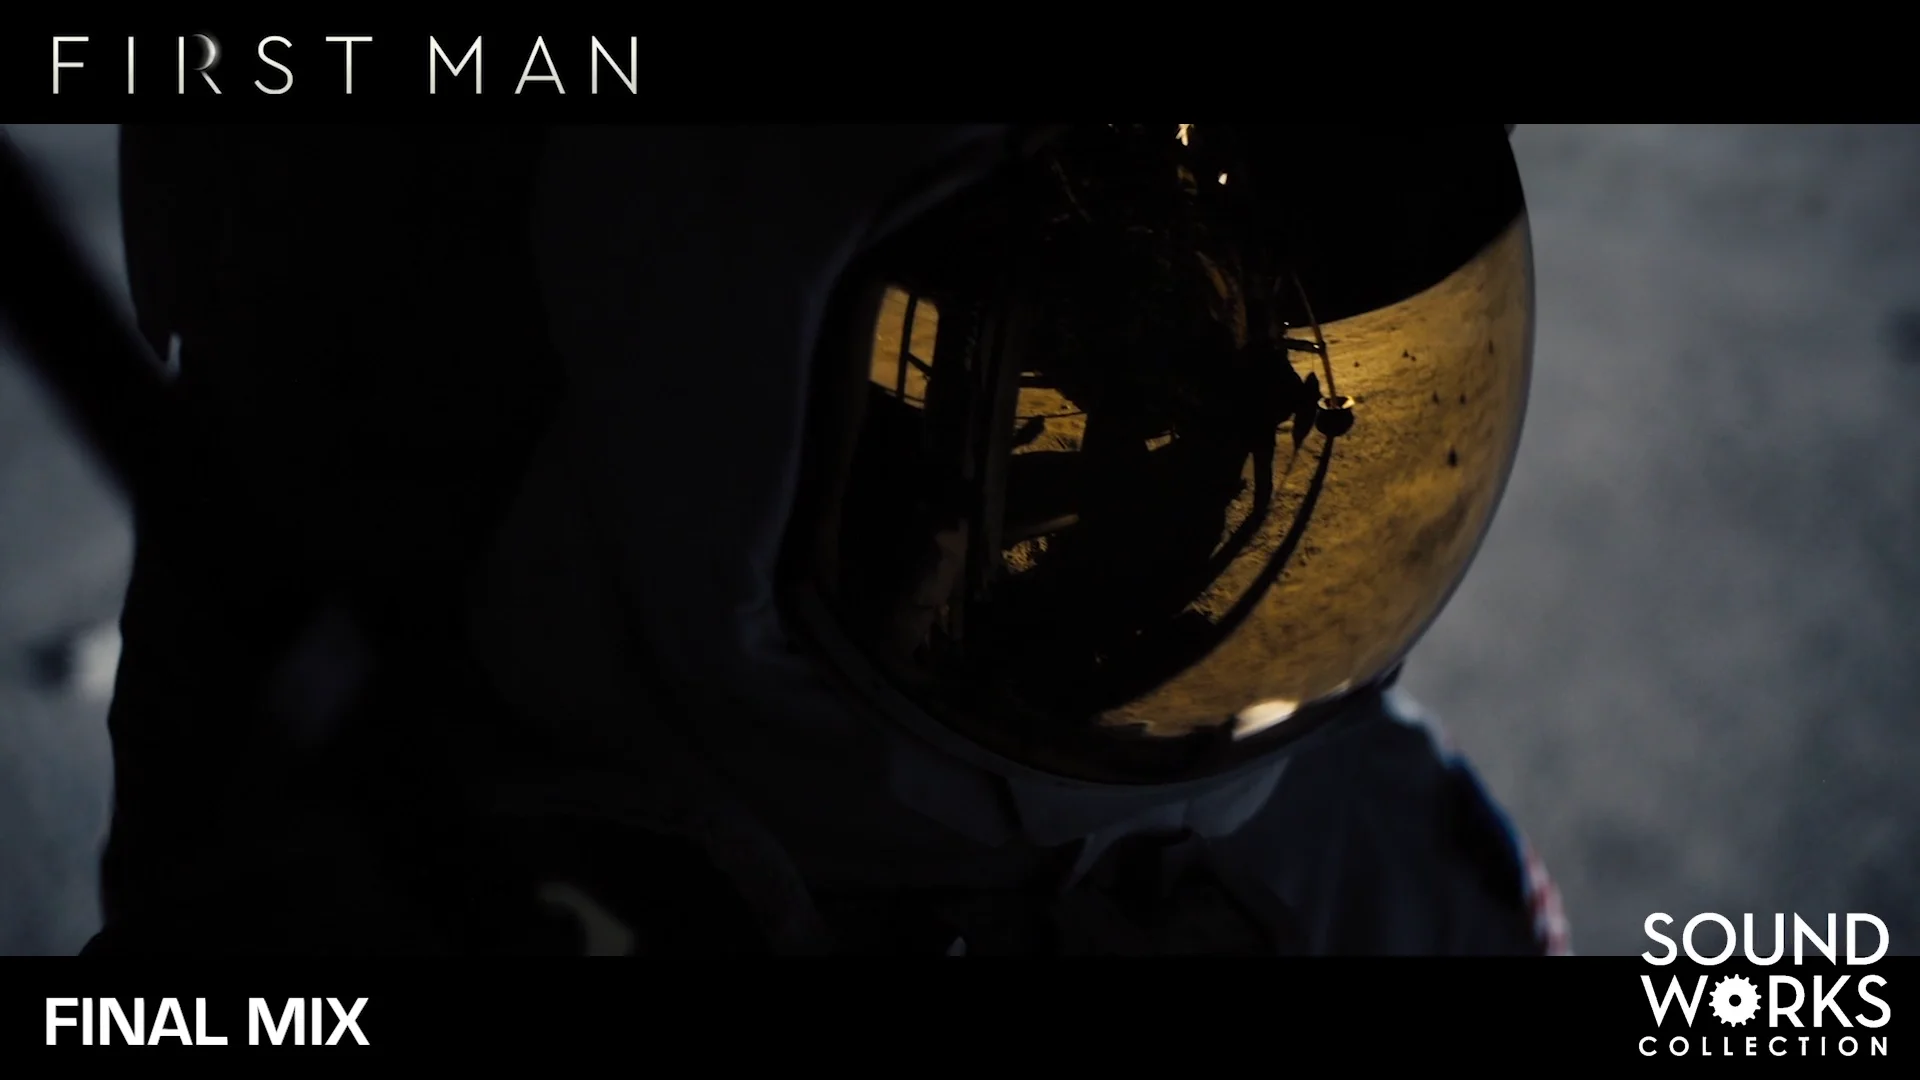 Moon Walk: First Man - The American Society of Cinematographers (en-US)